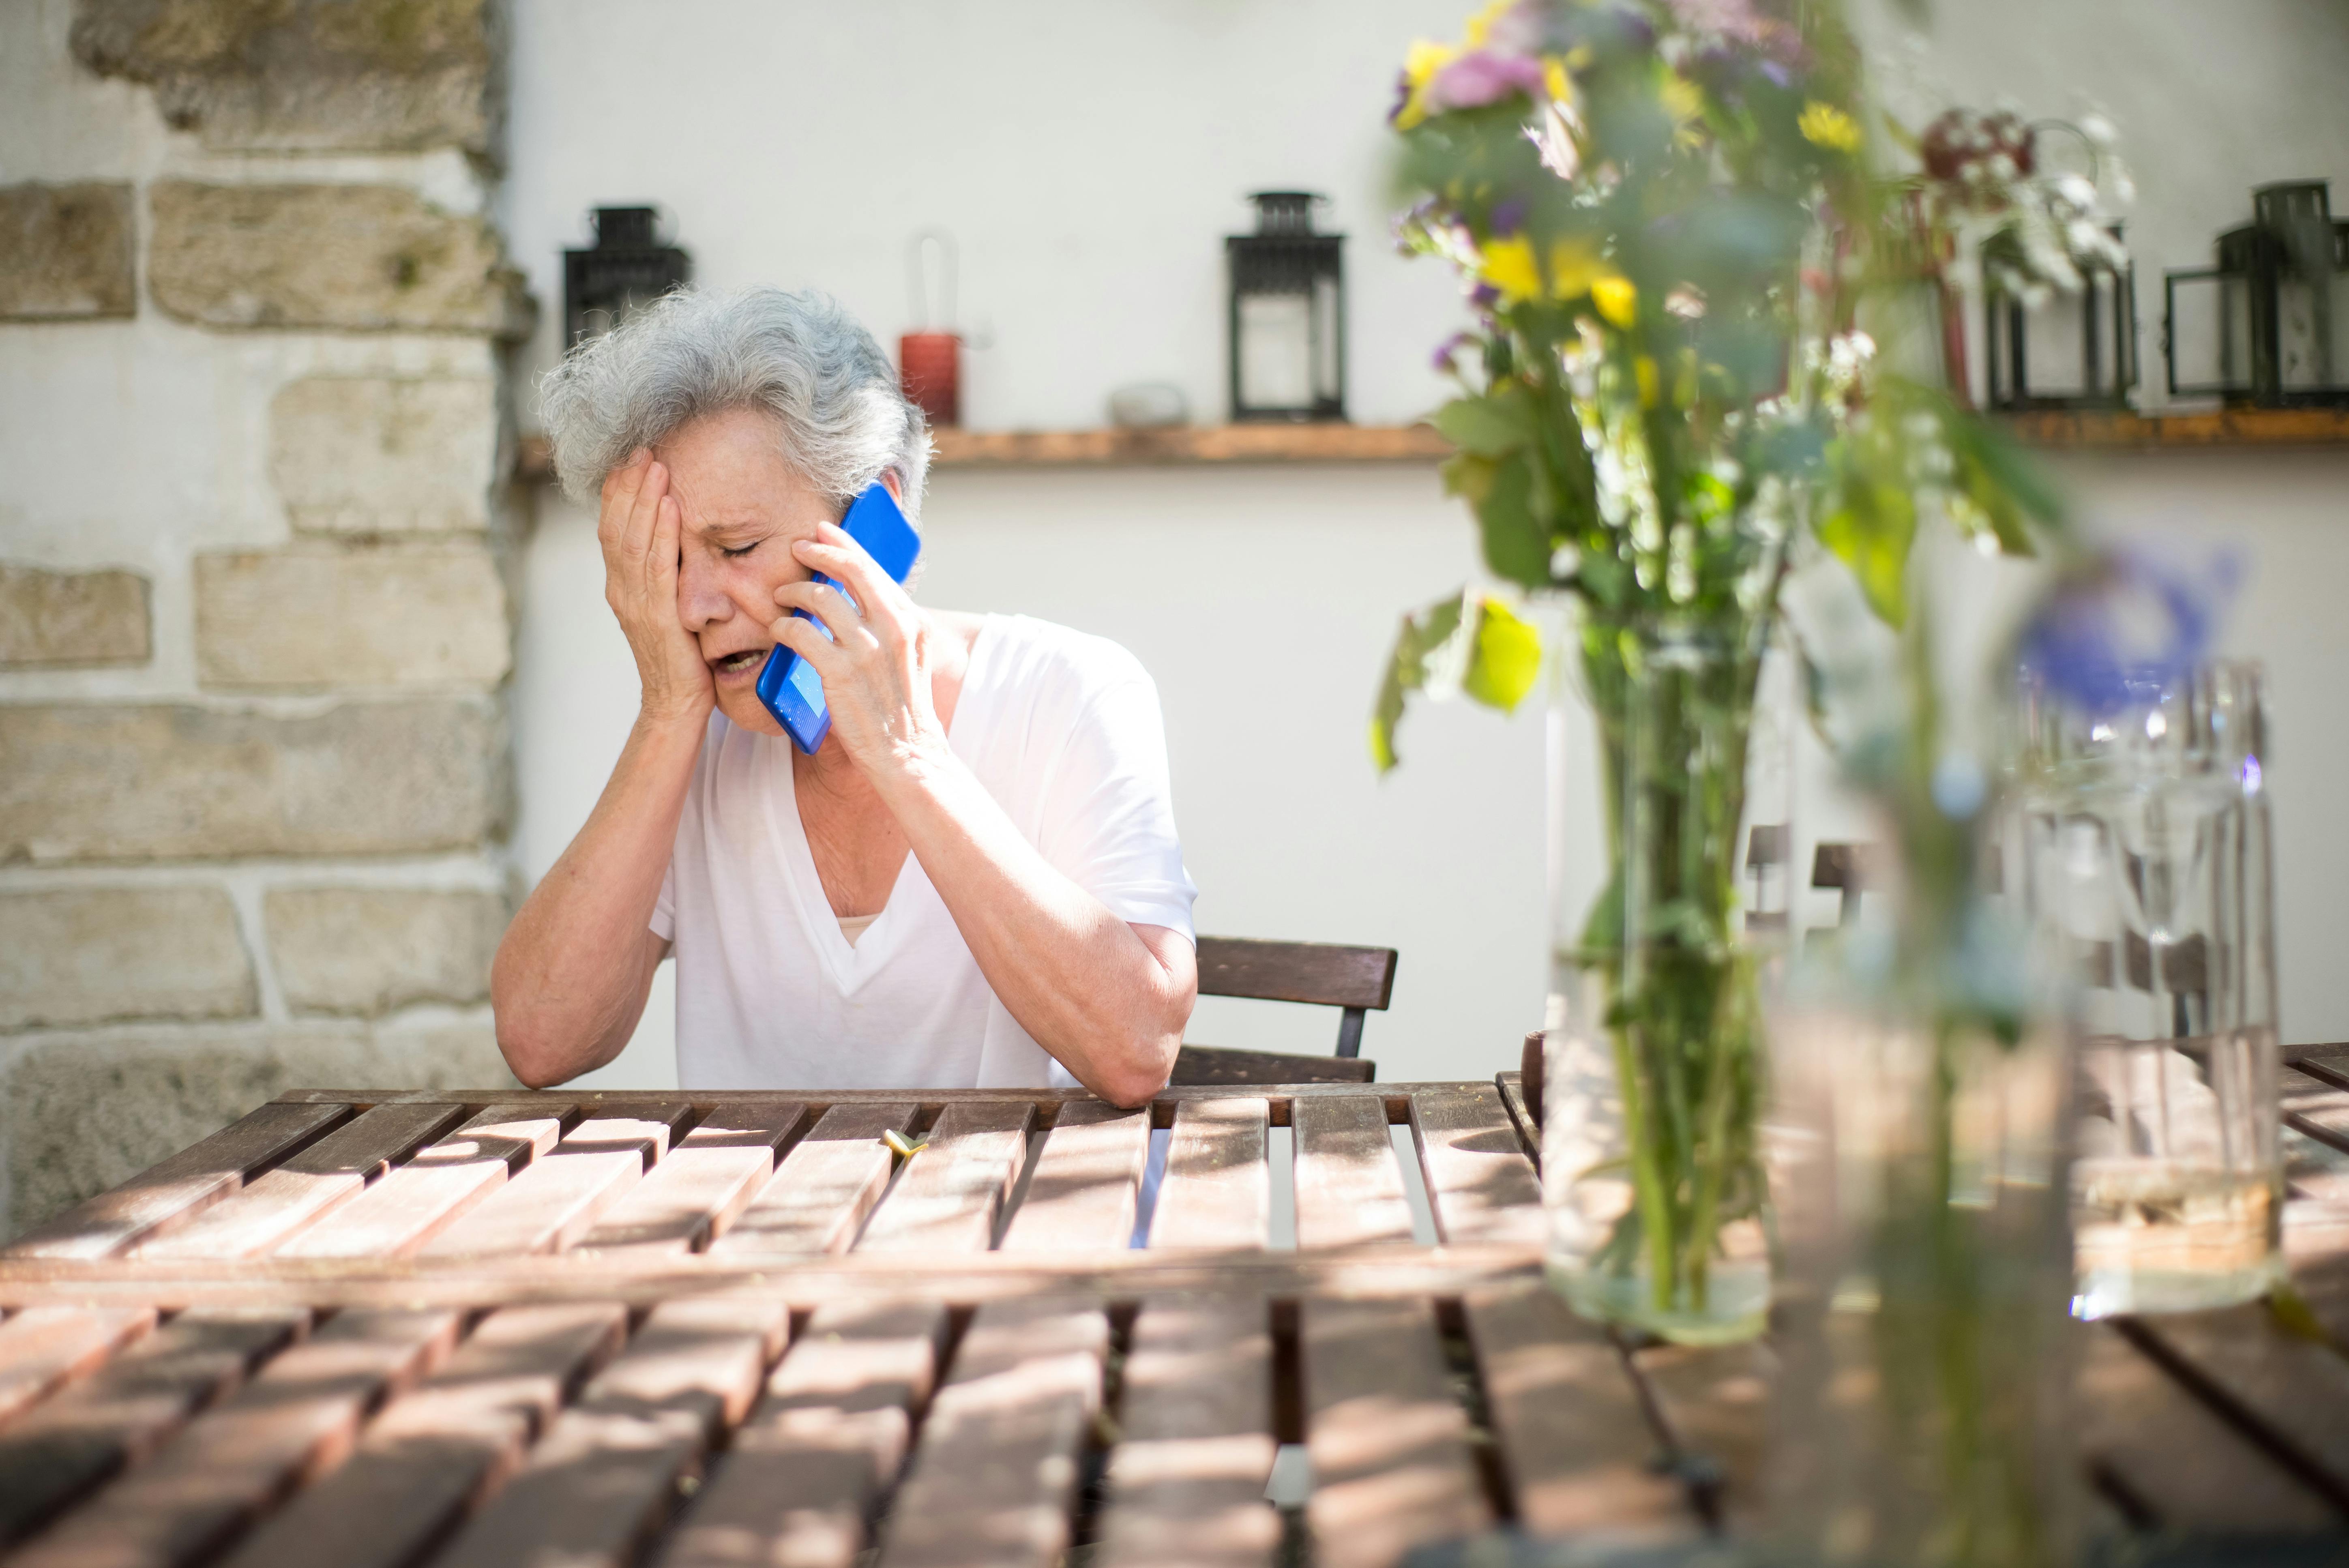 An upset and emotional older woman speaking on the phone | Source: Pexels